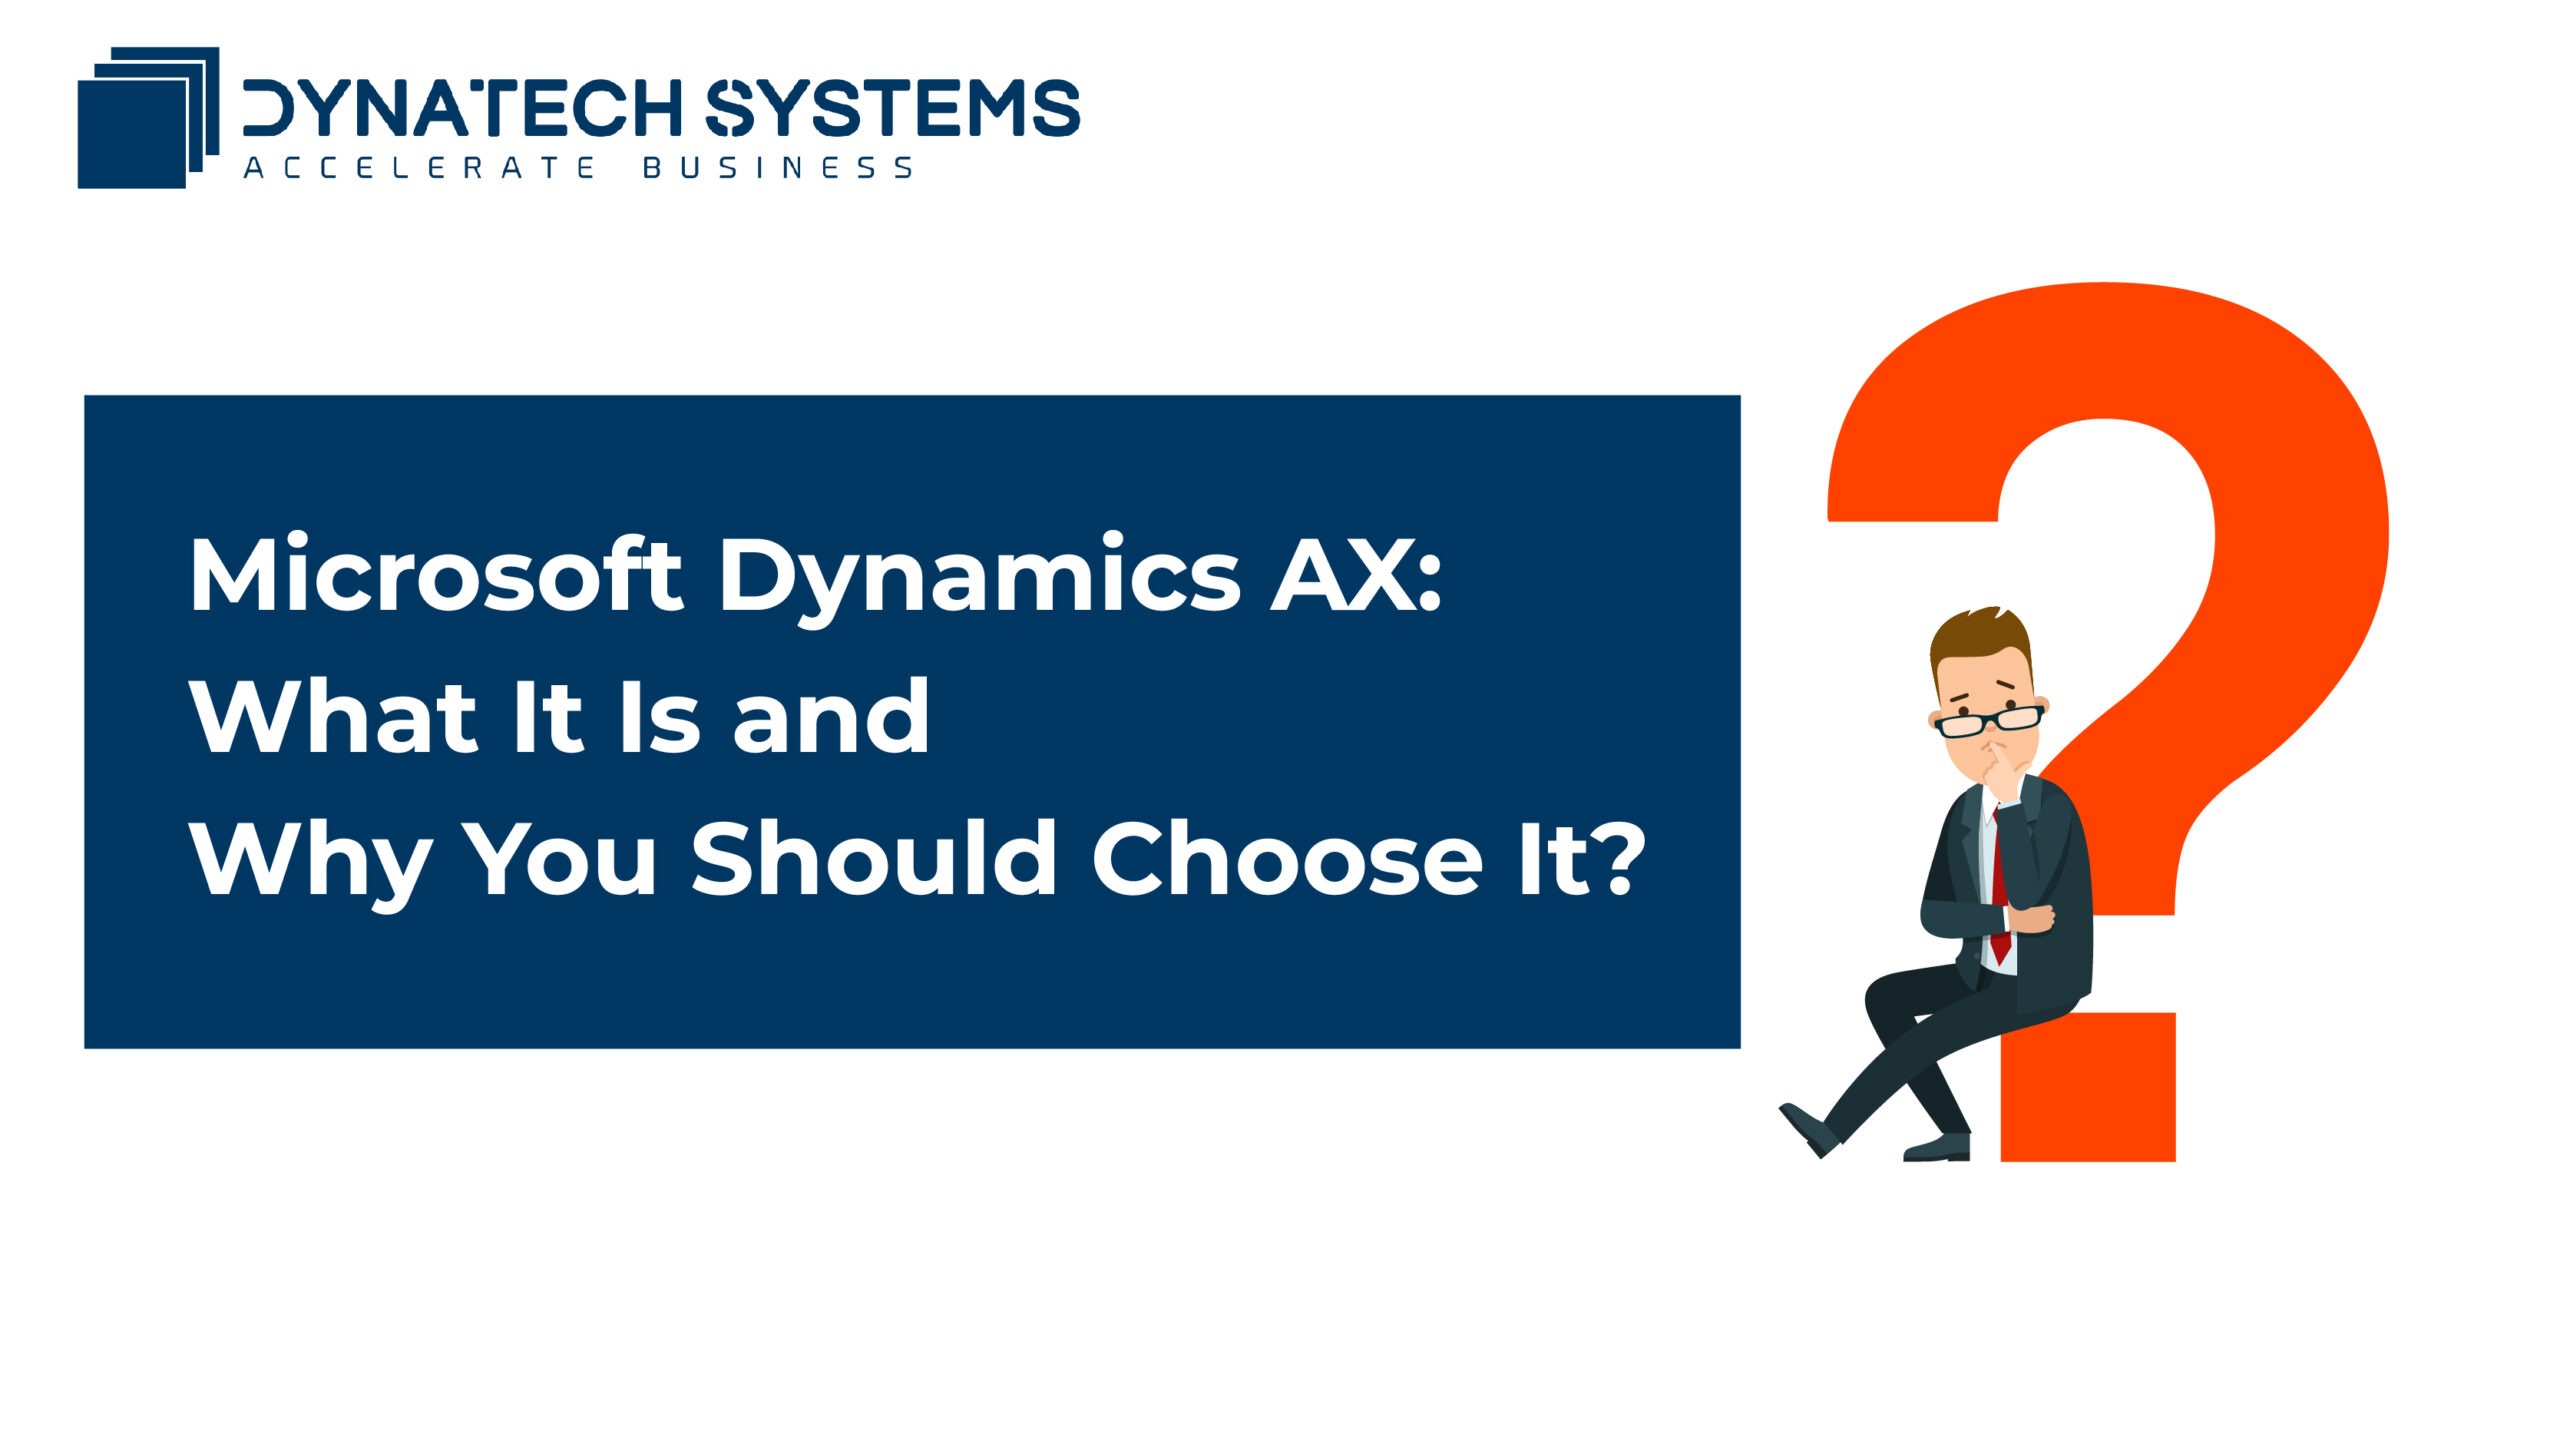 Microsoft Dynamics AX: What It Is and Why You Should Choose It